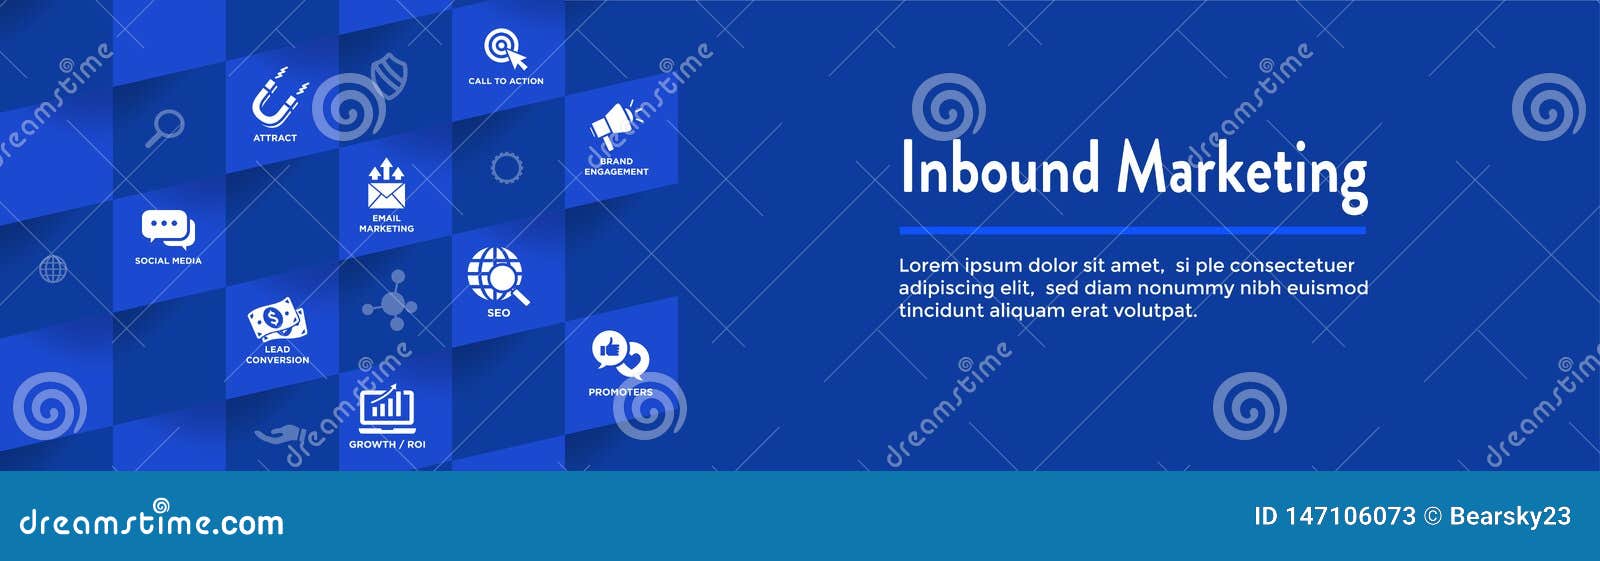 digital inbound marketing web banner with  icons with cta, growth, seo, etc